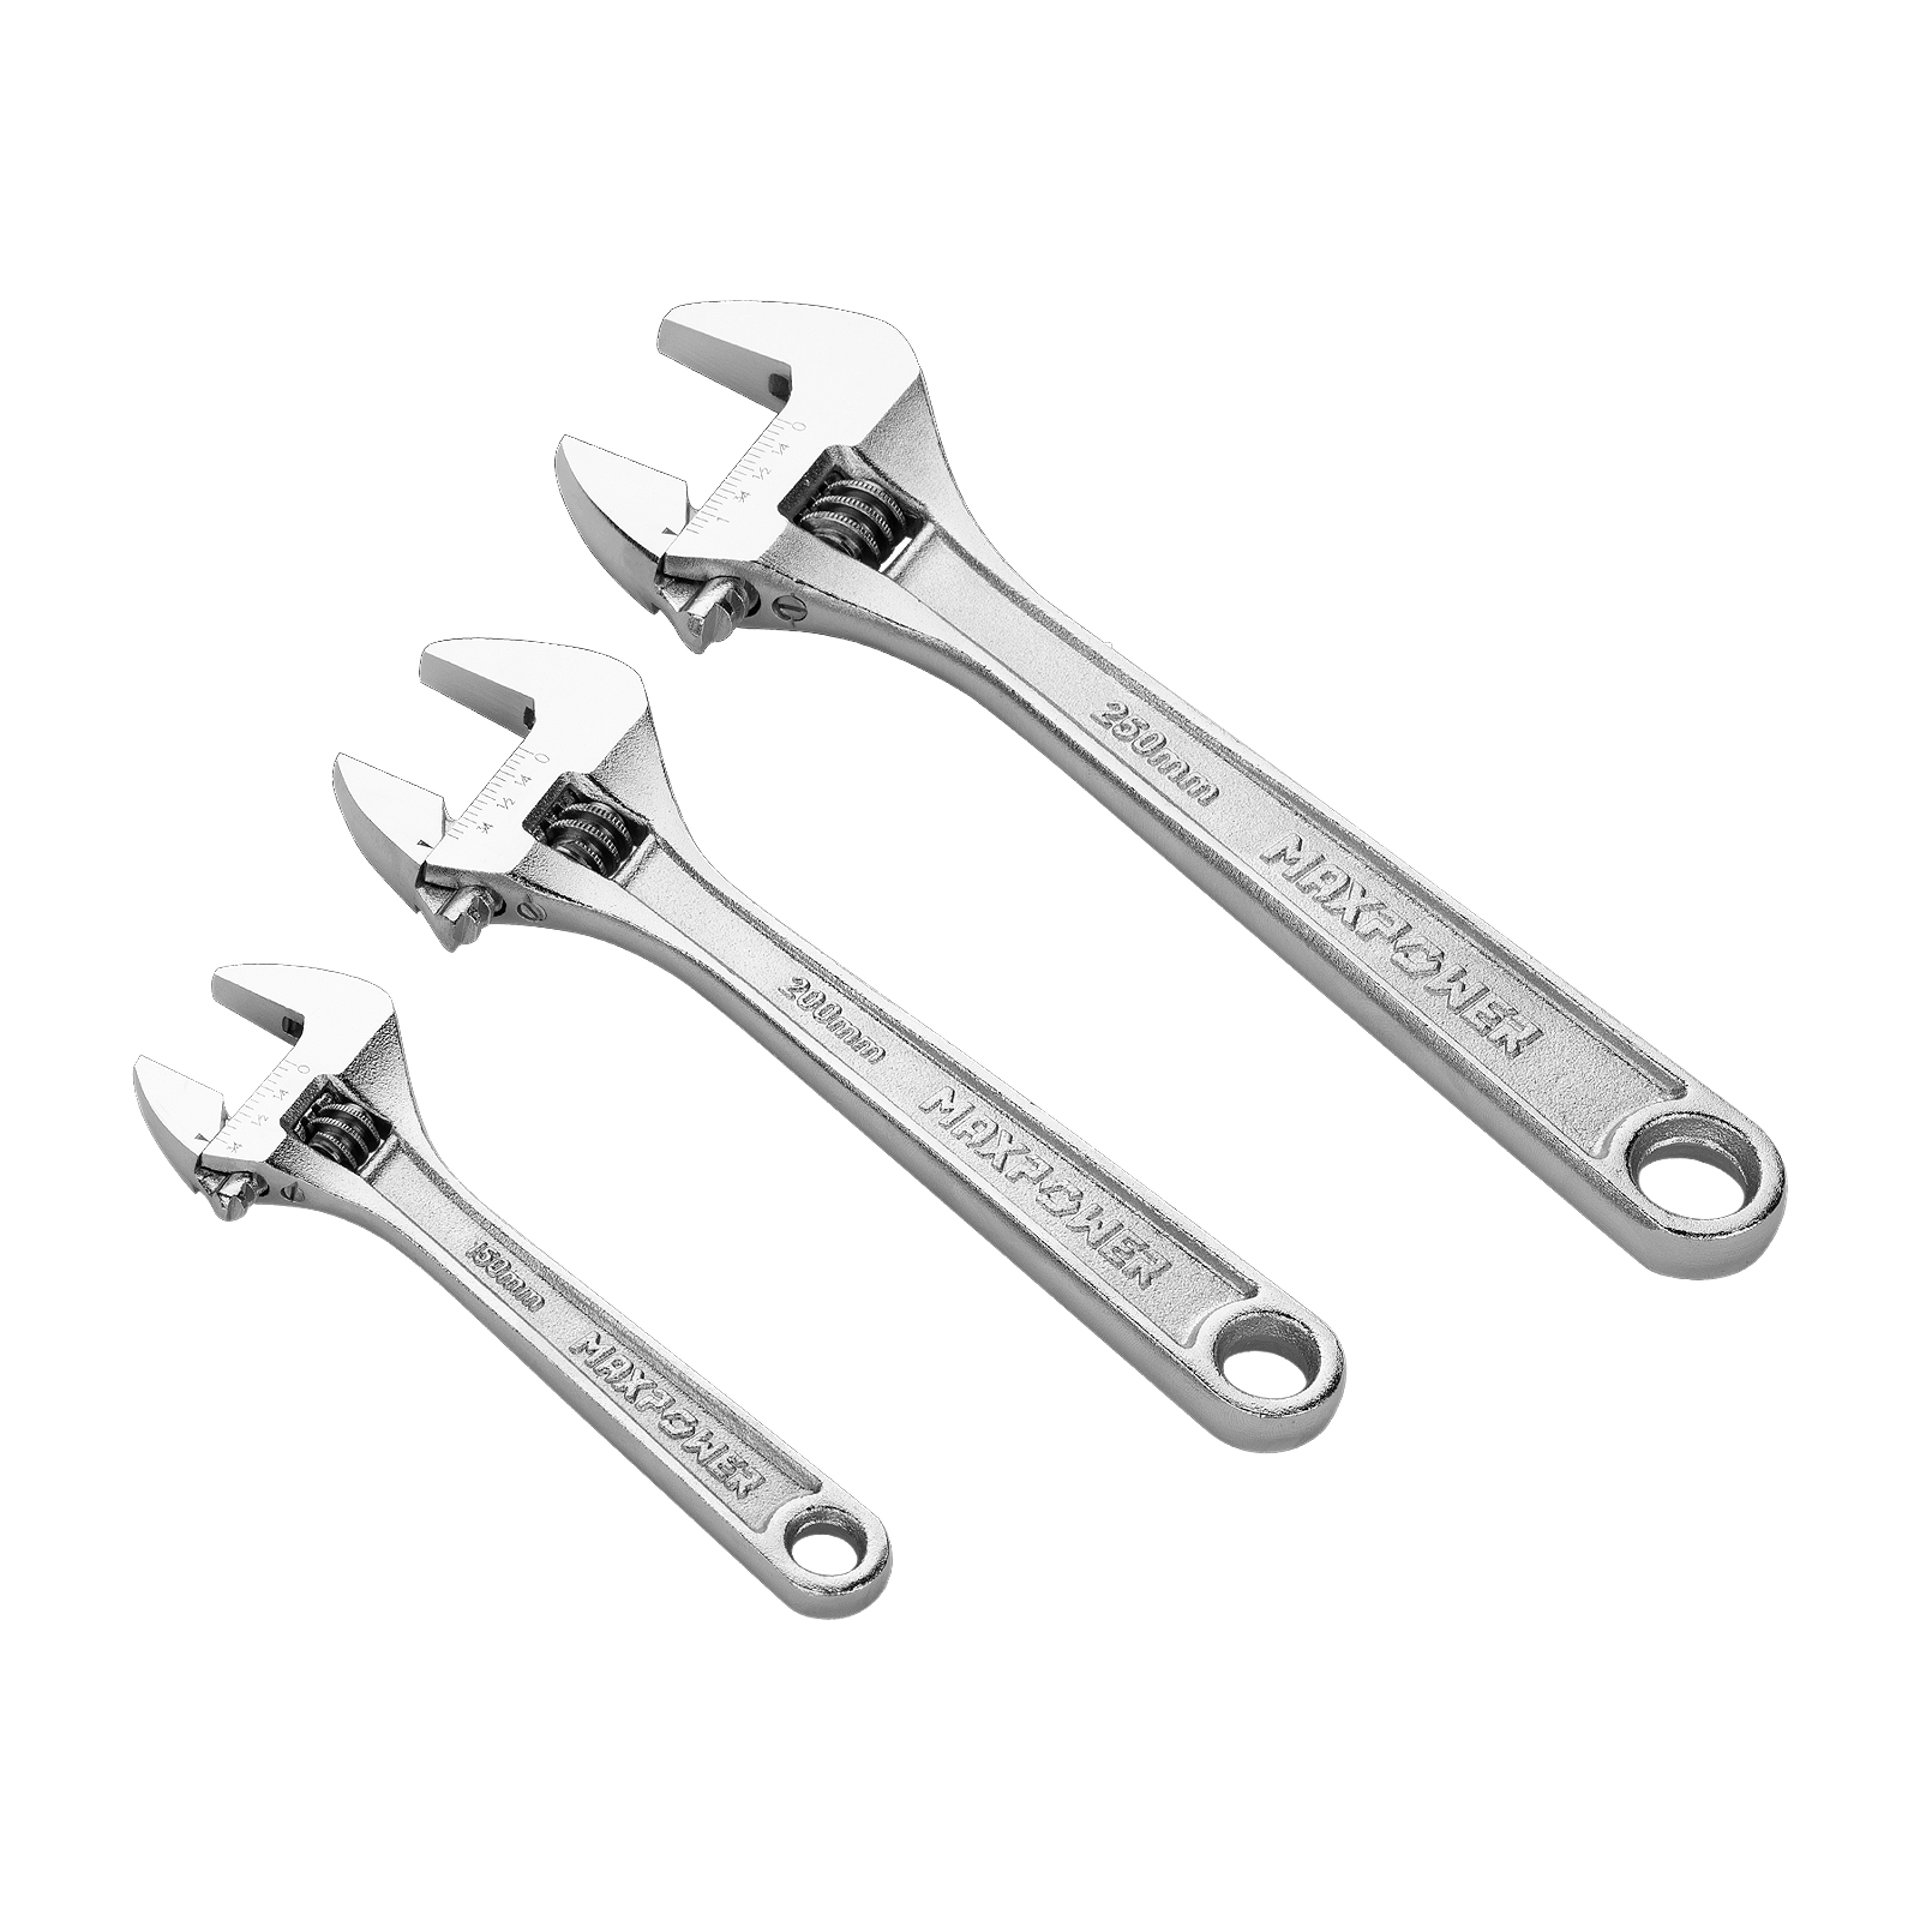 Adjustable Wrench Spanner Set (6in, 8in, 10in), 3PCS